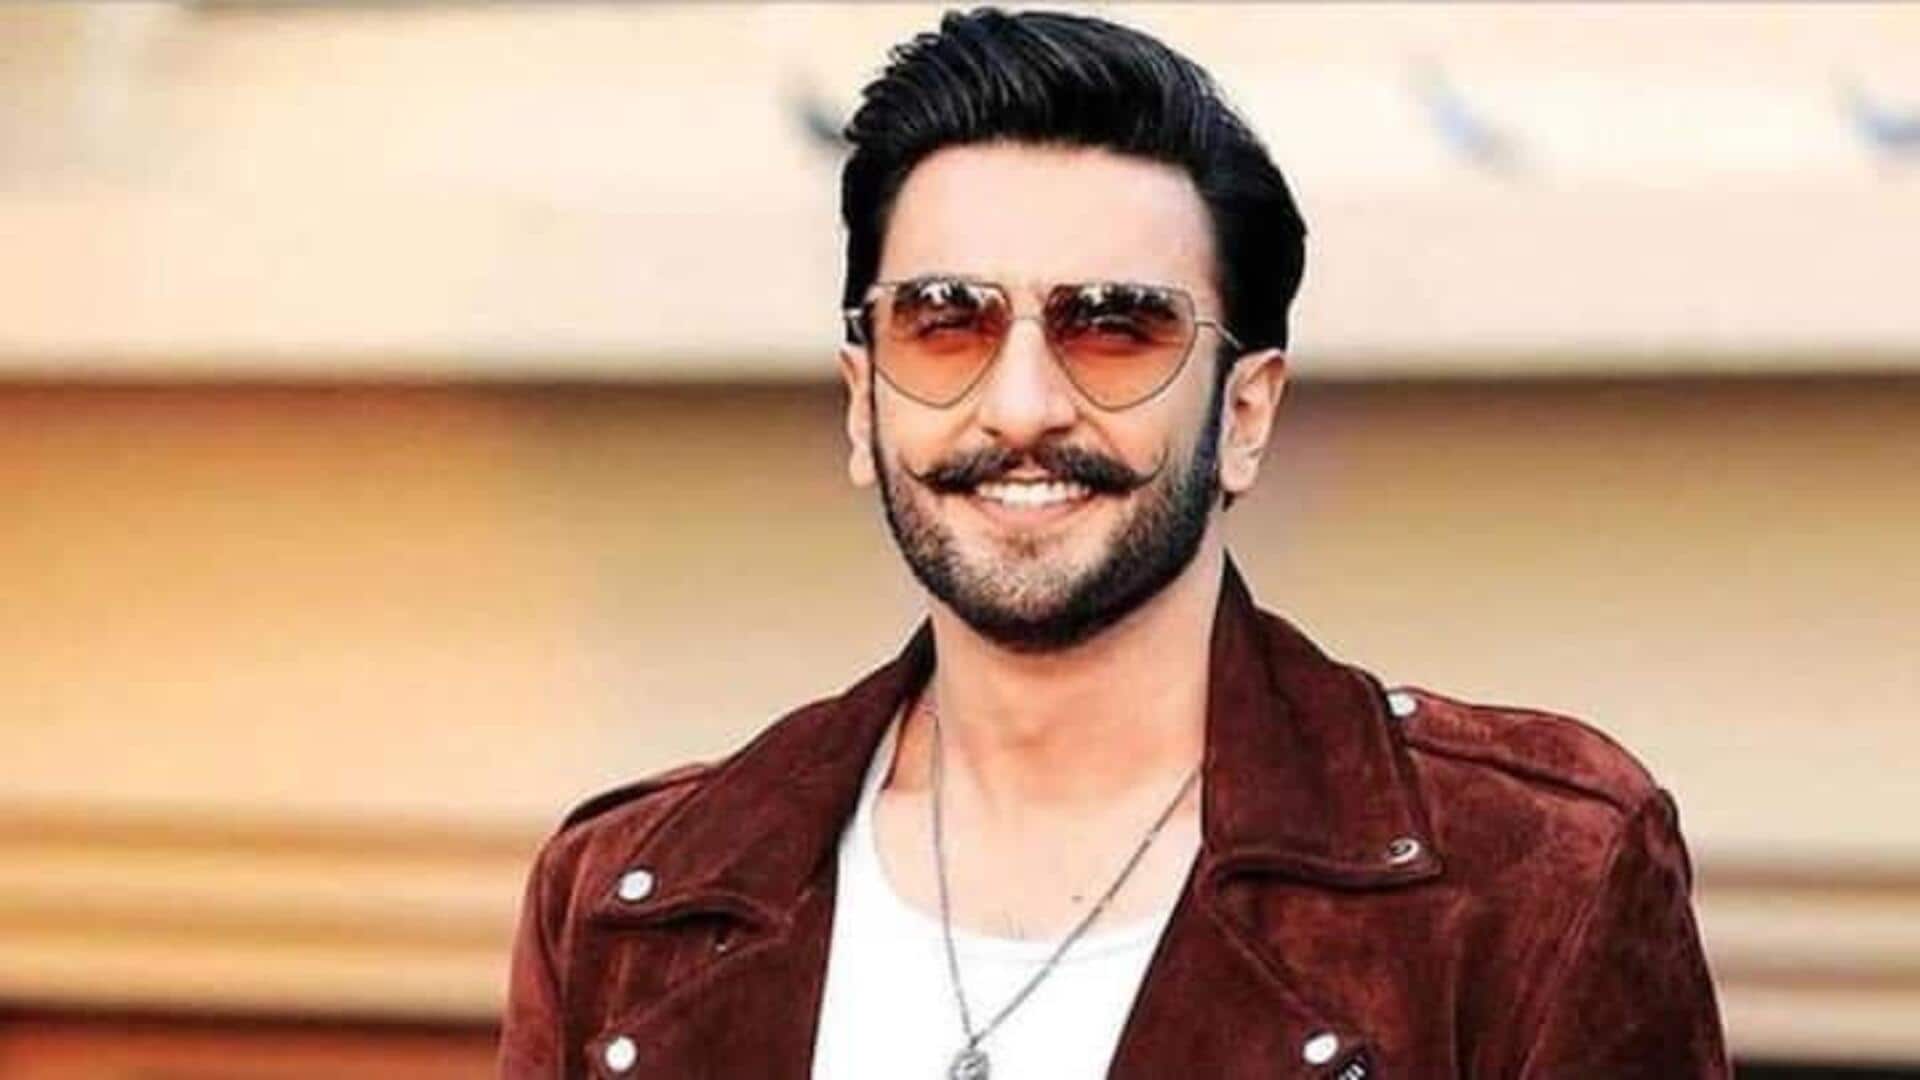 Ranveer Singh will play 'larger-than-life' role in Prasanth Varma's film